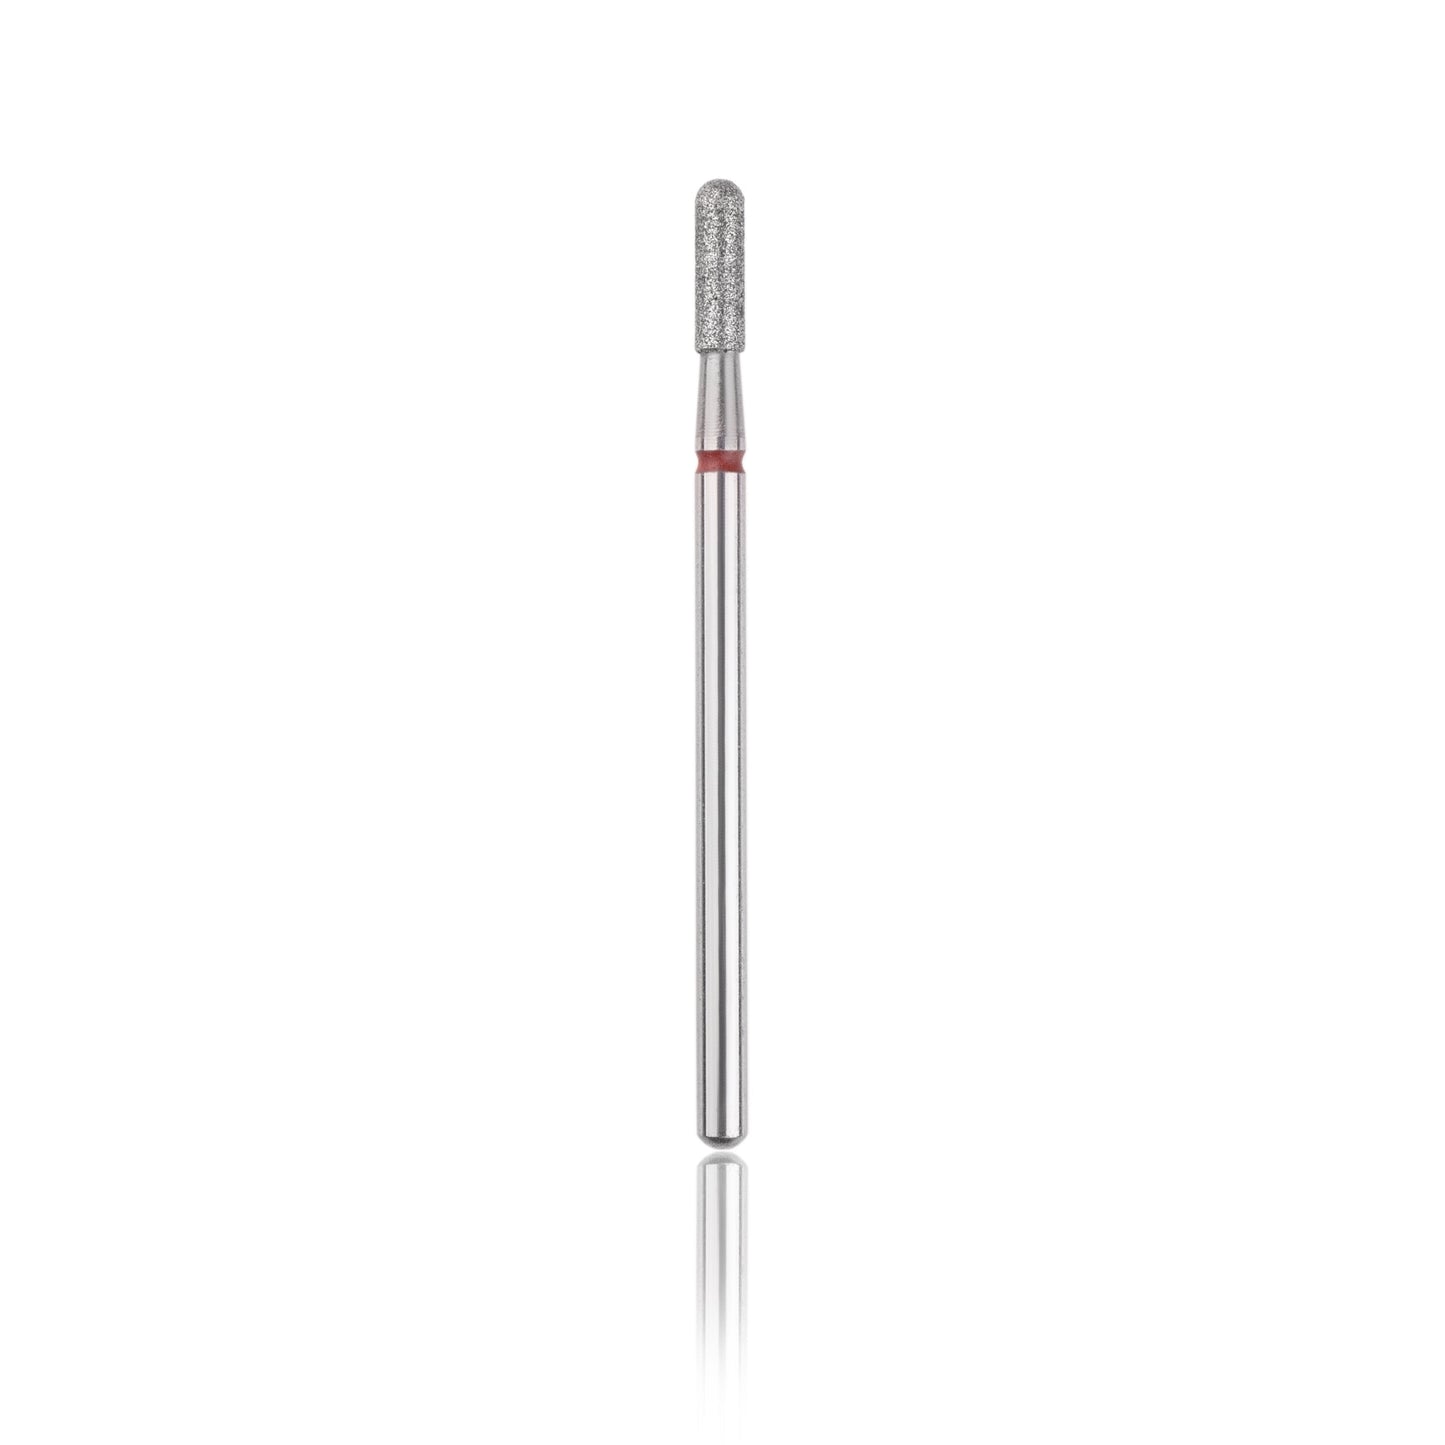 HEAD-Diamond bur "rounded cylinder" red, L-8,0 mm, Ø2,3 mm-1